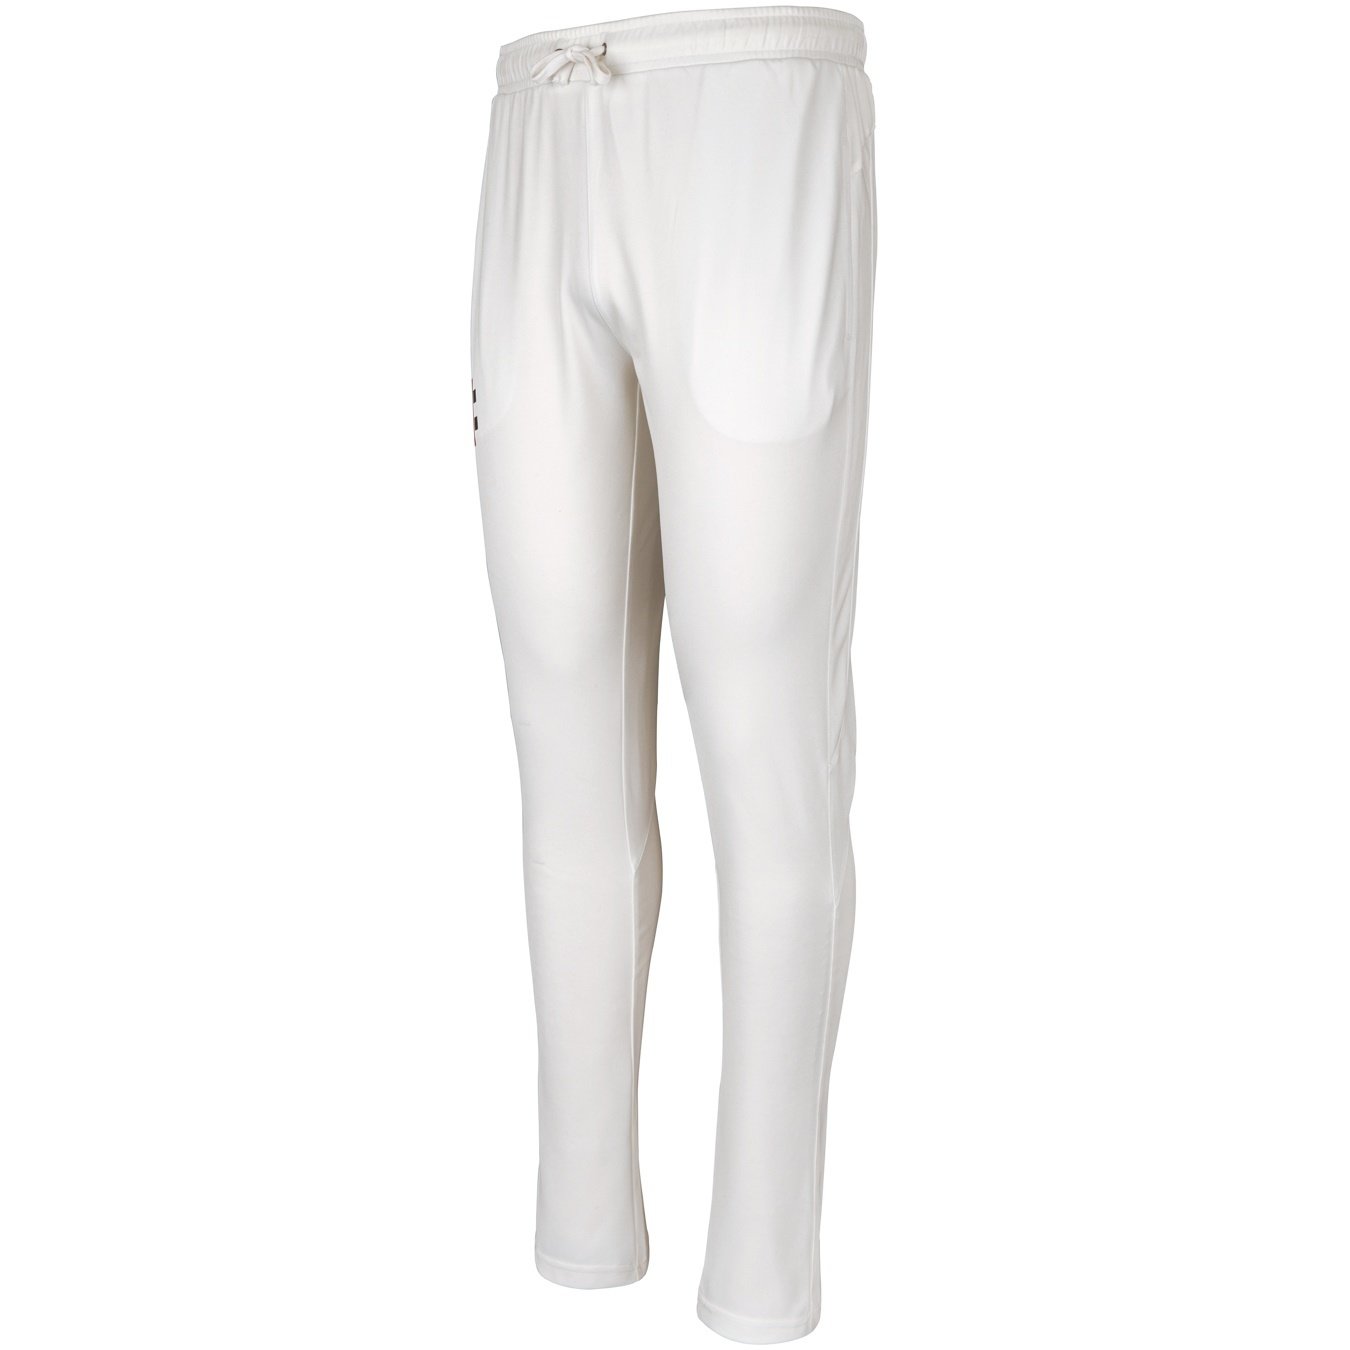 Handsworth Pro Performance Cricket Trousers